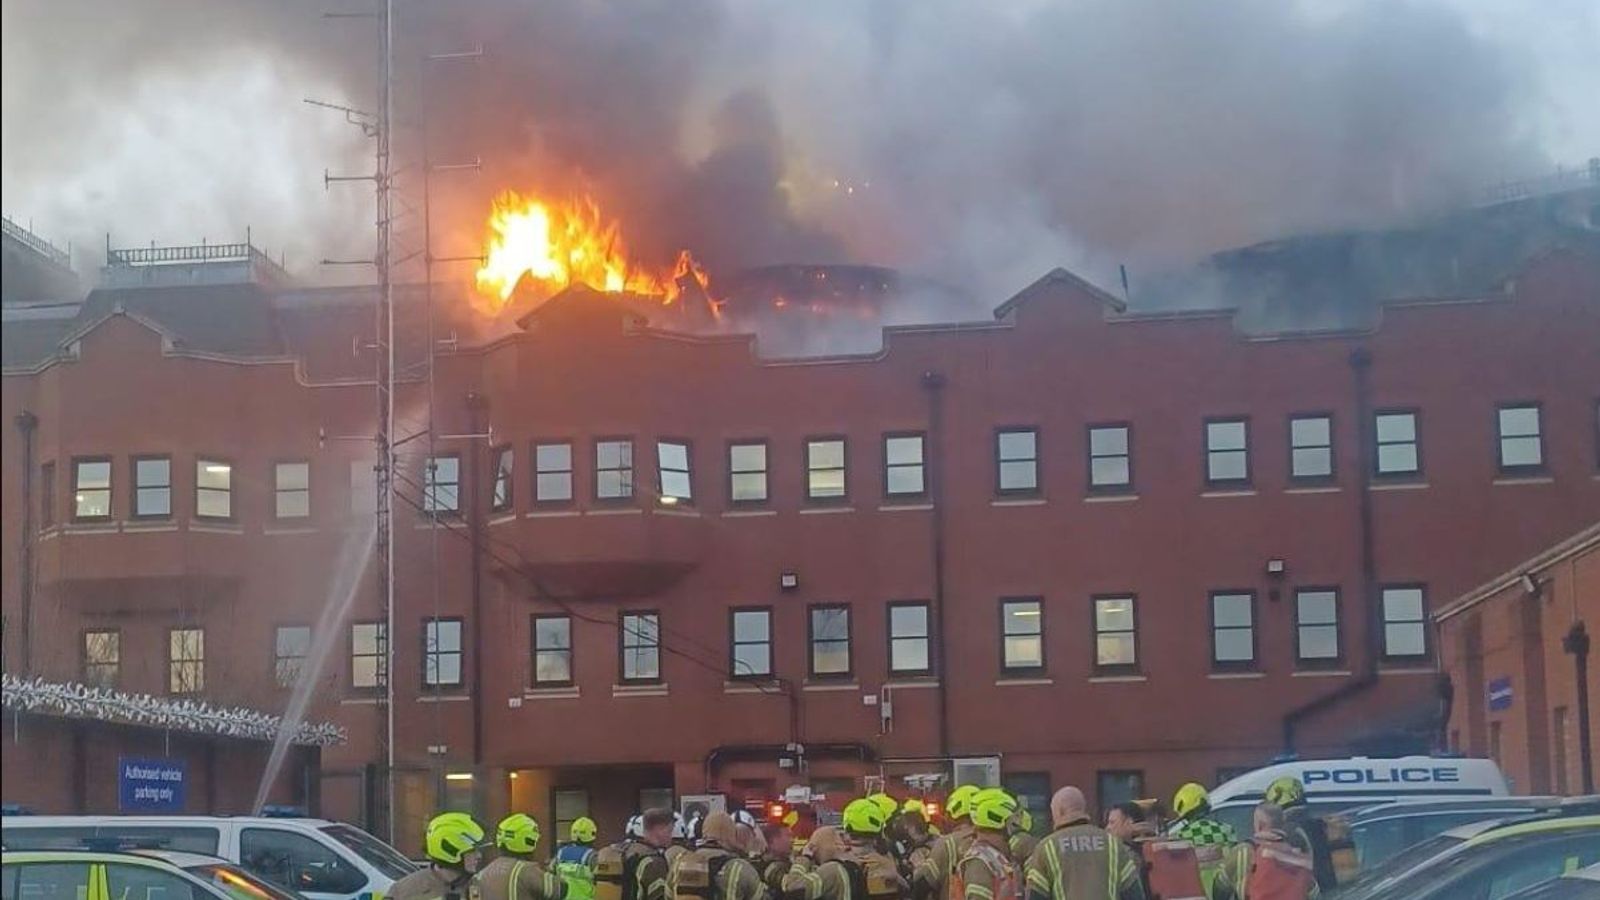 Roof 'completely destroyed as more than 170 firefighters tackle blaze at London police station